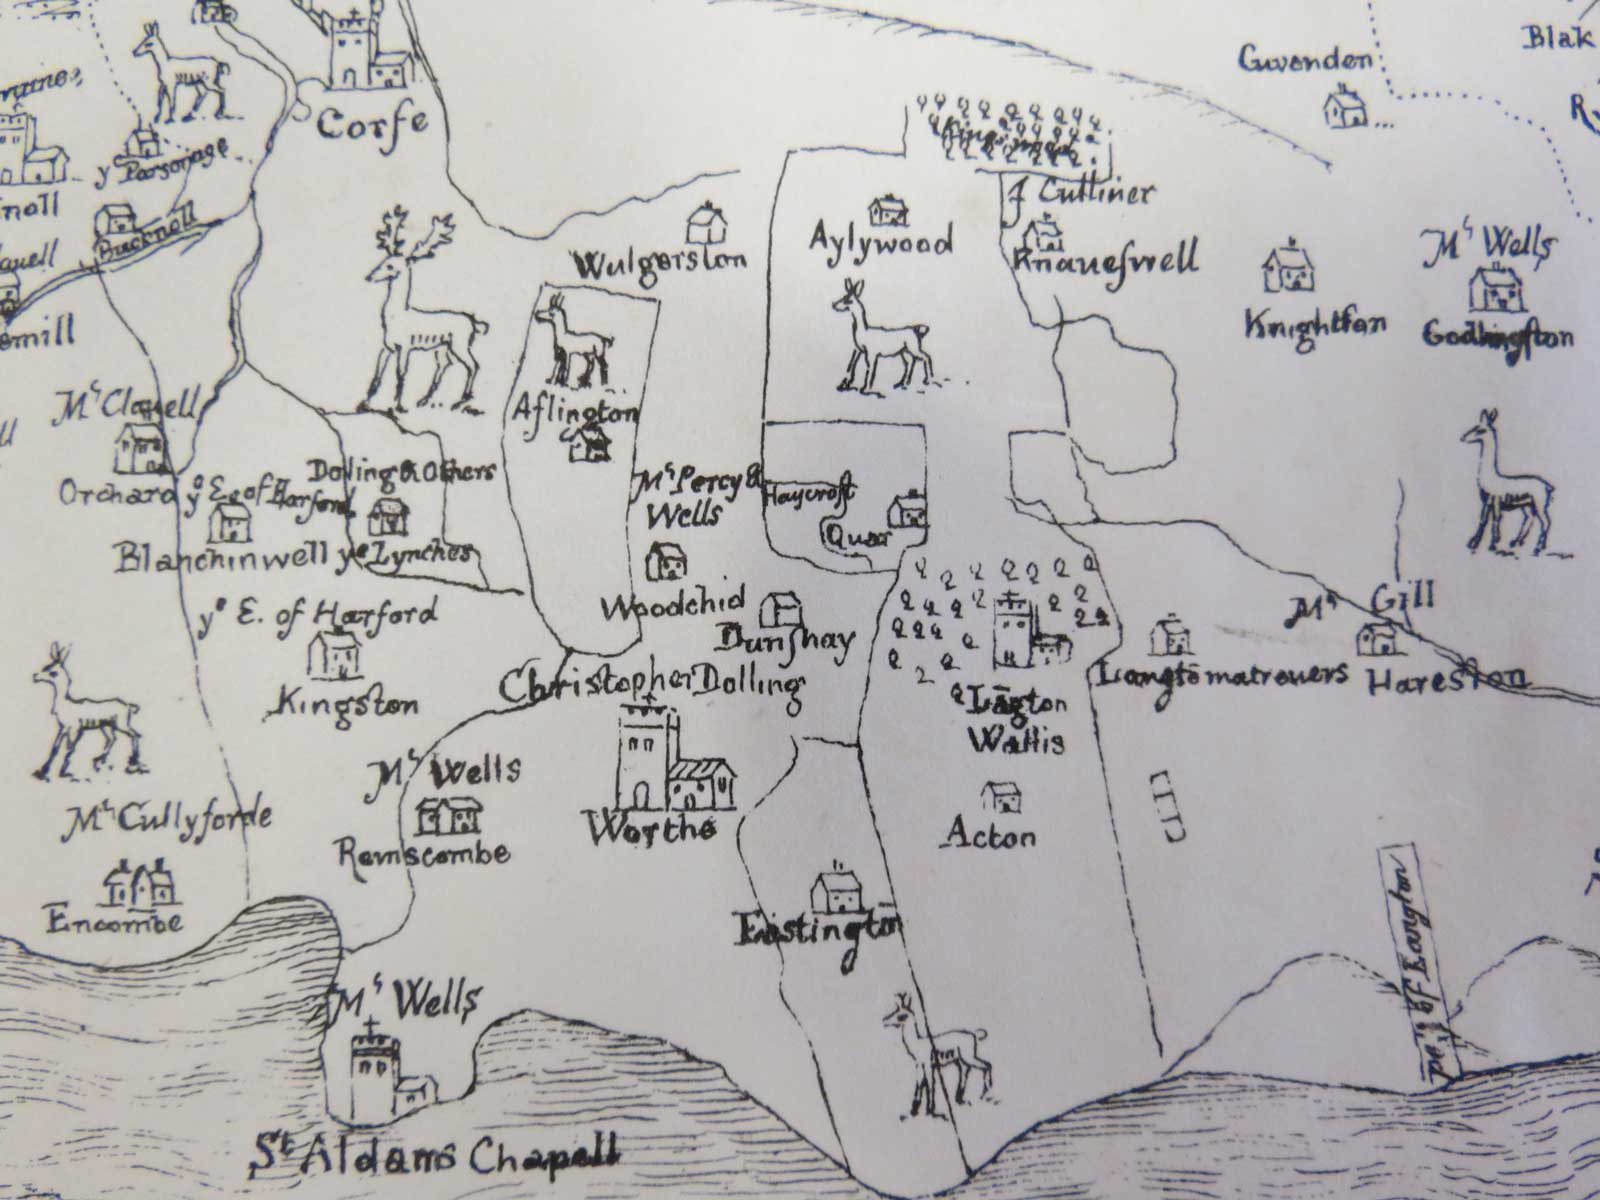 Treswell's 1585 map shows some Purbeck estates and their owners. Dunshay (centre) was then held by Christopher Dolling.